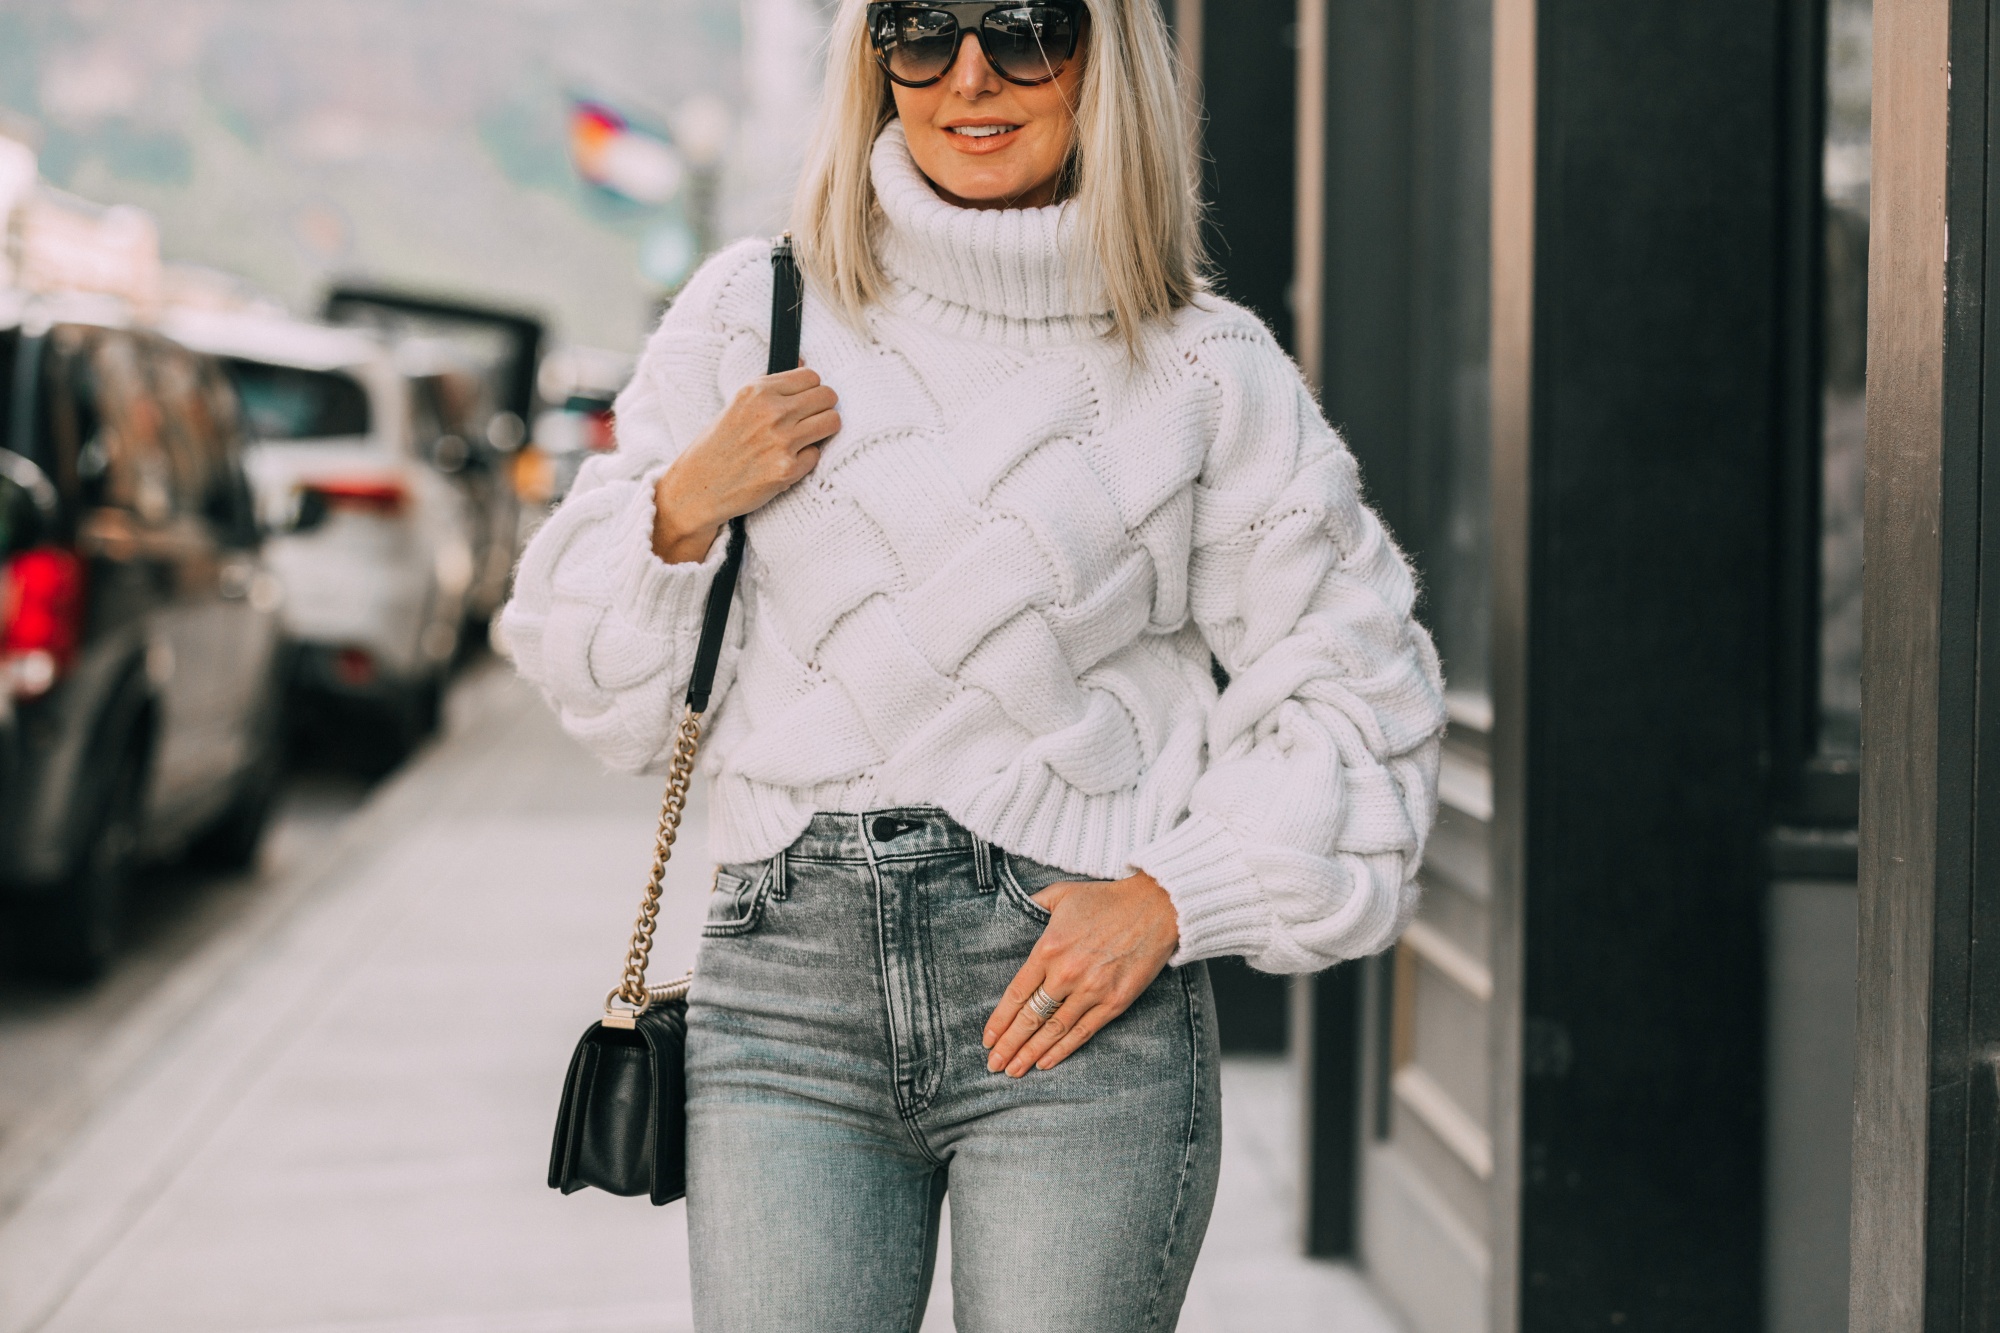 How To Style Dad Sneakers, Fashion blogger Erin Busbee of BusbeeStyle.com wearing designer dad sneakers with Mother ankle zip jeans, Lovers + Friends white sweater, and Chanel Boy Bag in Telluride, CO